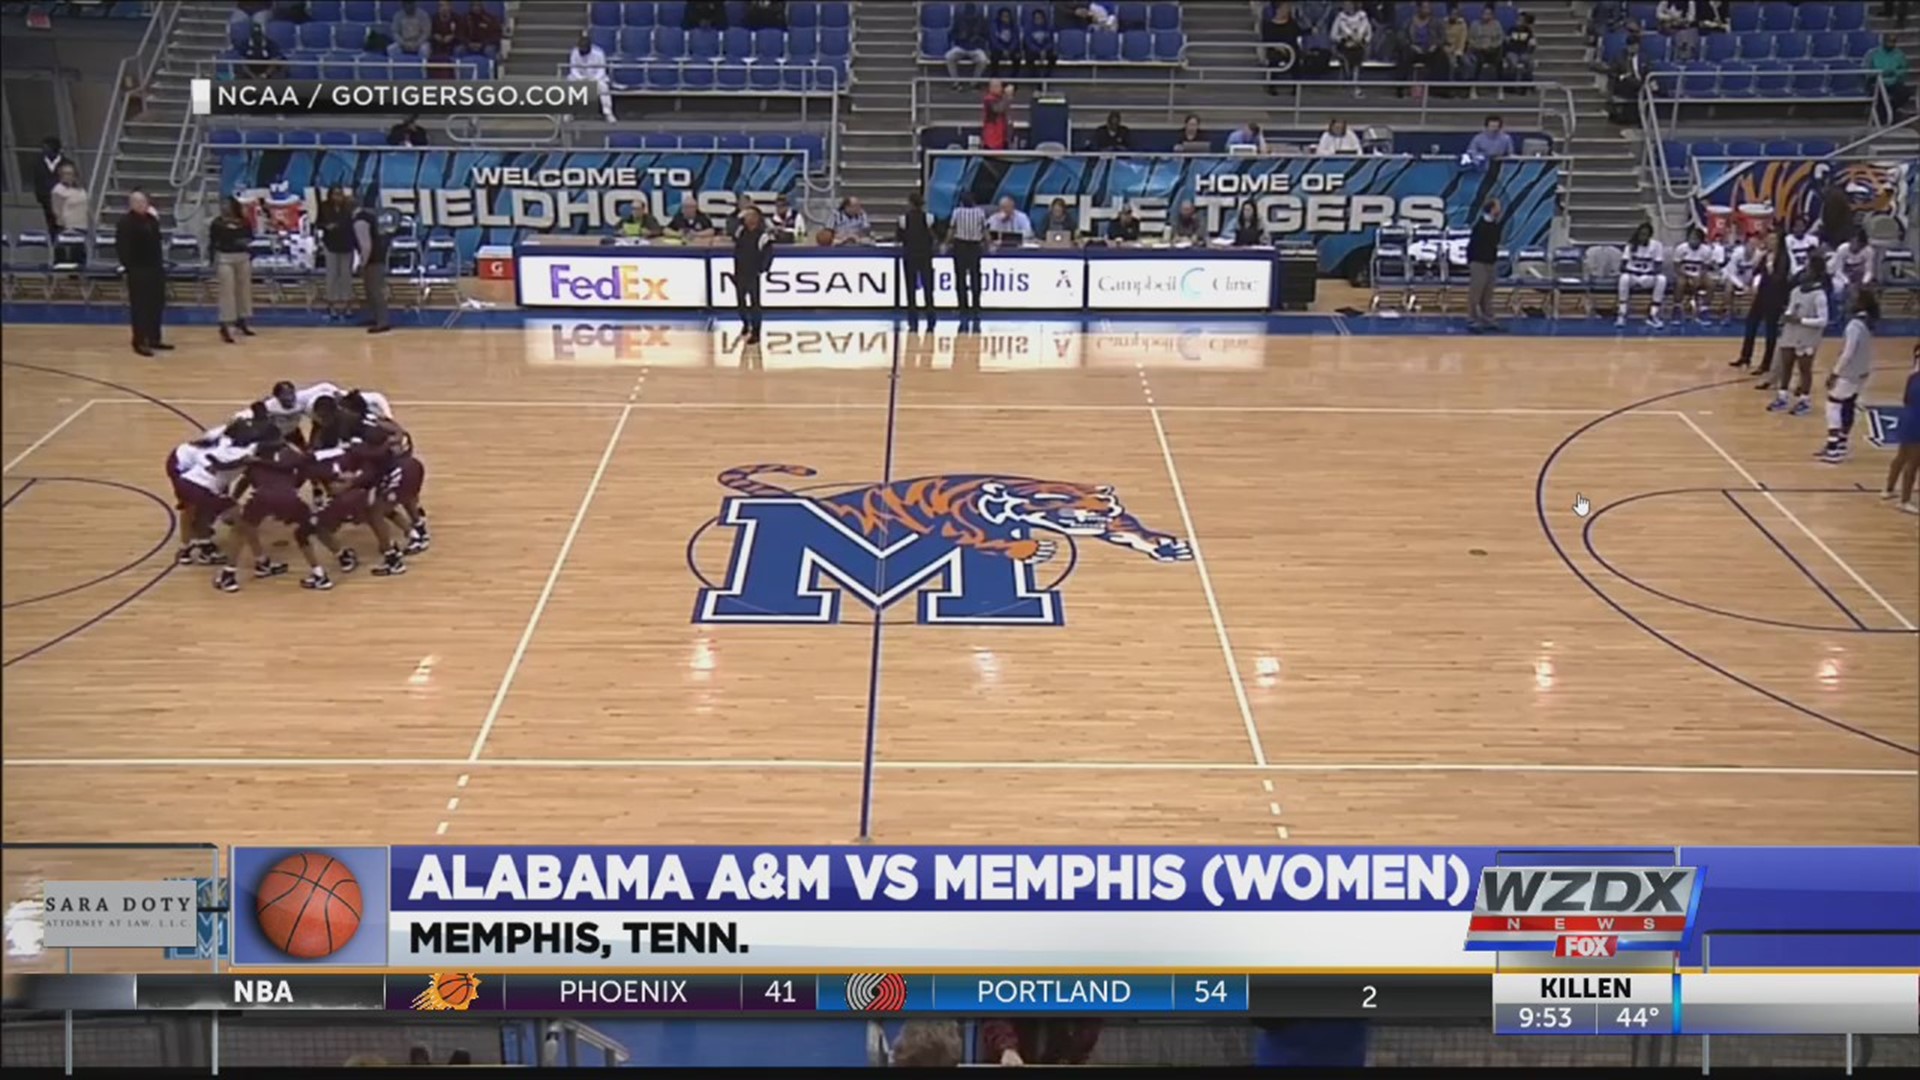 Madison Griggs scored 21 points as Memphis held off Alabama A&M 79-71 Monday night in a women's basketball non-conference game. DeShawna Harper led Alabama A&M with 30 points and three steals.